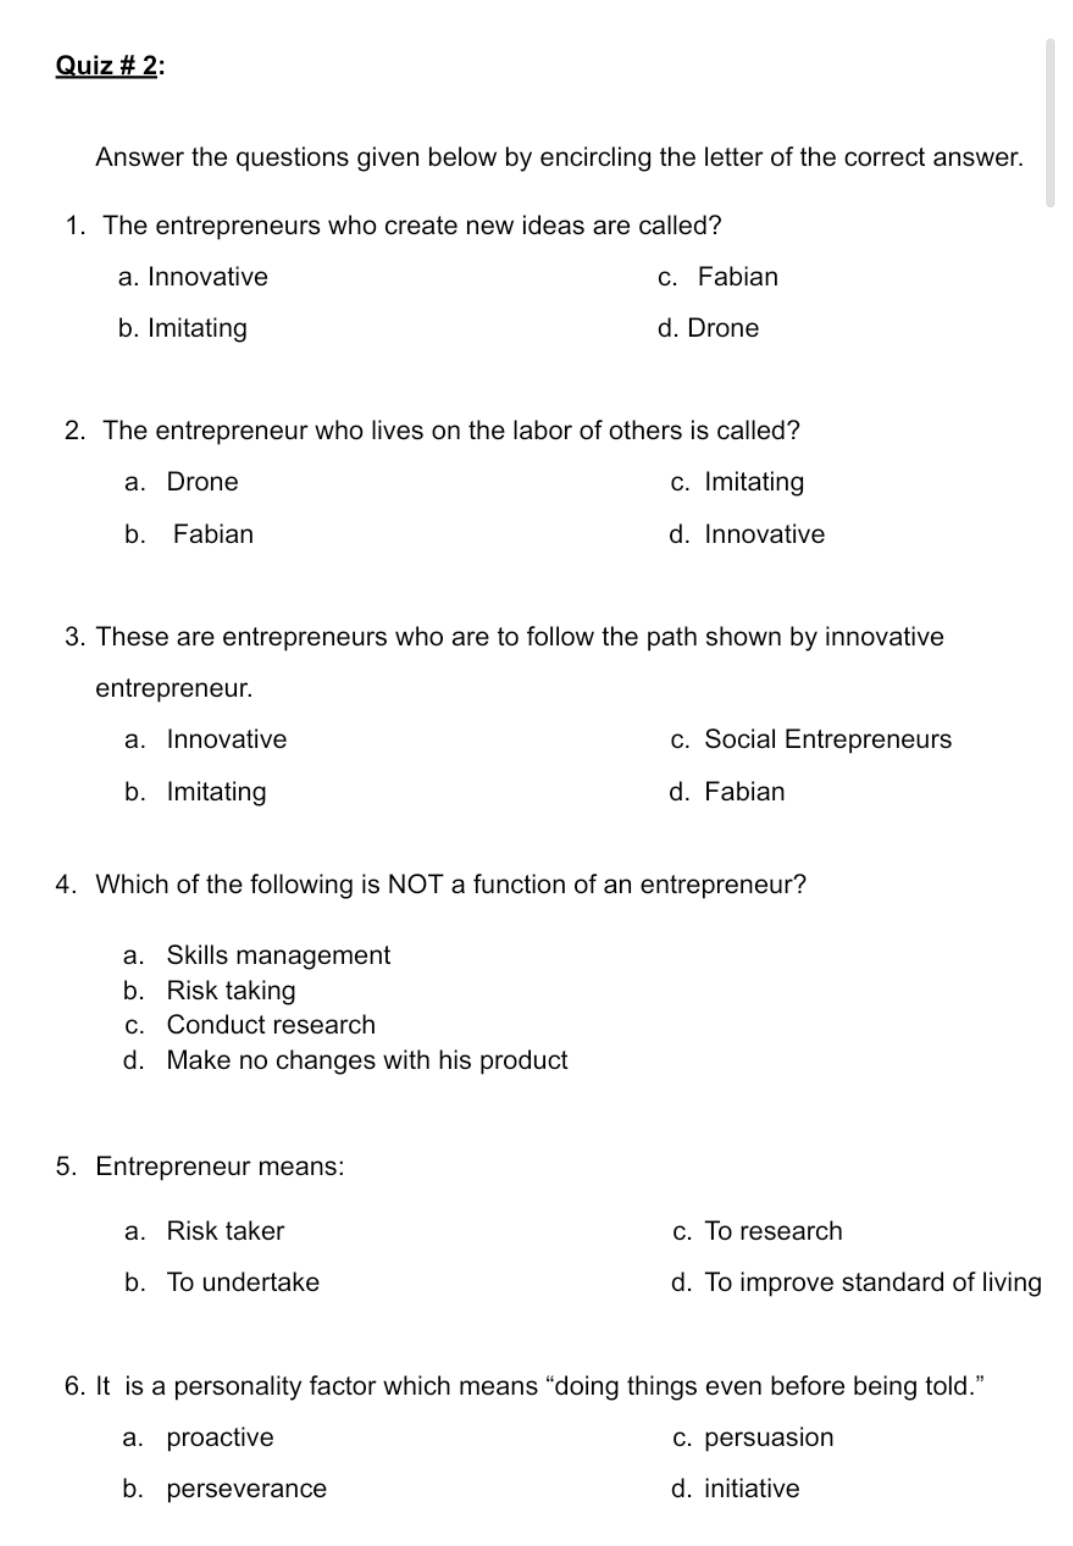 Quiz # 2:
Answer the questions given below by encircling the letter of the correct answer.
1. The entrepreneurs who create new ideas are called?
a. Innovative
c. Fabian
b. Imitating
d. Drone
2. The entrepreneur who lives on the labor of others is called?
a. Drone
c. Imitating
b. Fabian
d. Innovative
3. These are entrepreneurs who are to follow the path shown by innovative
entrepreneur.
a. Innovative
c. Social Entrepreneurs
b. Imitating
d. Fabian
4. Which of the following is NOT a function of an entrepreneur?
a. Skills management
b. Risk taking
C. Conduct research
d. Make no changes with his product
5. Entrepreneur means:
a. Risk taker
c. To research
b. To undertake
d. To improve standard of living
6. It is a personality factor which means "doing things even before being told."
а. proactive
c. persuasion
b. perseverance
d. initiative
